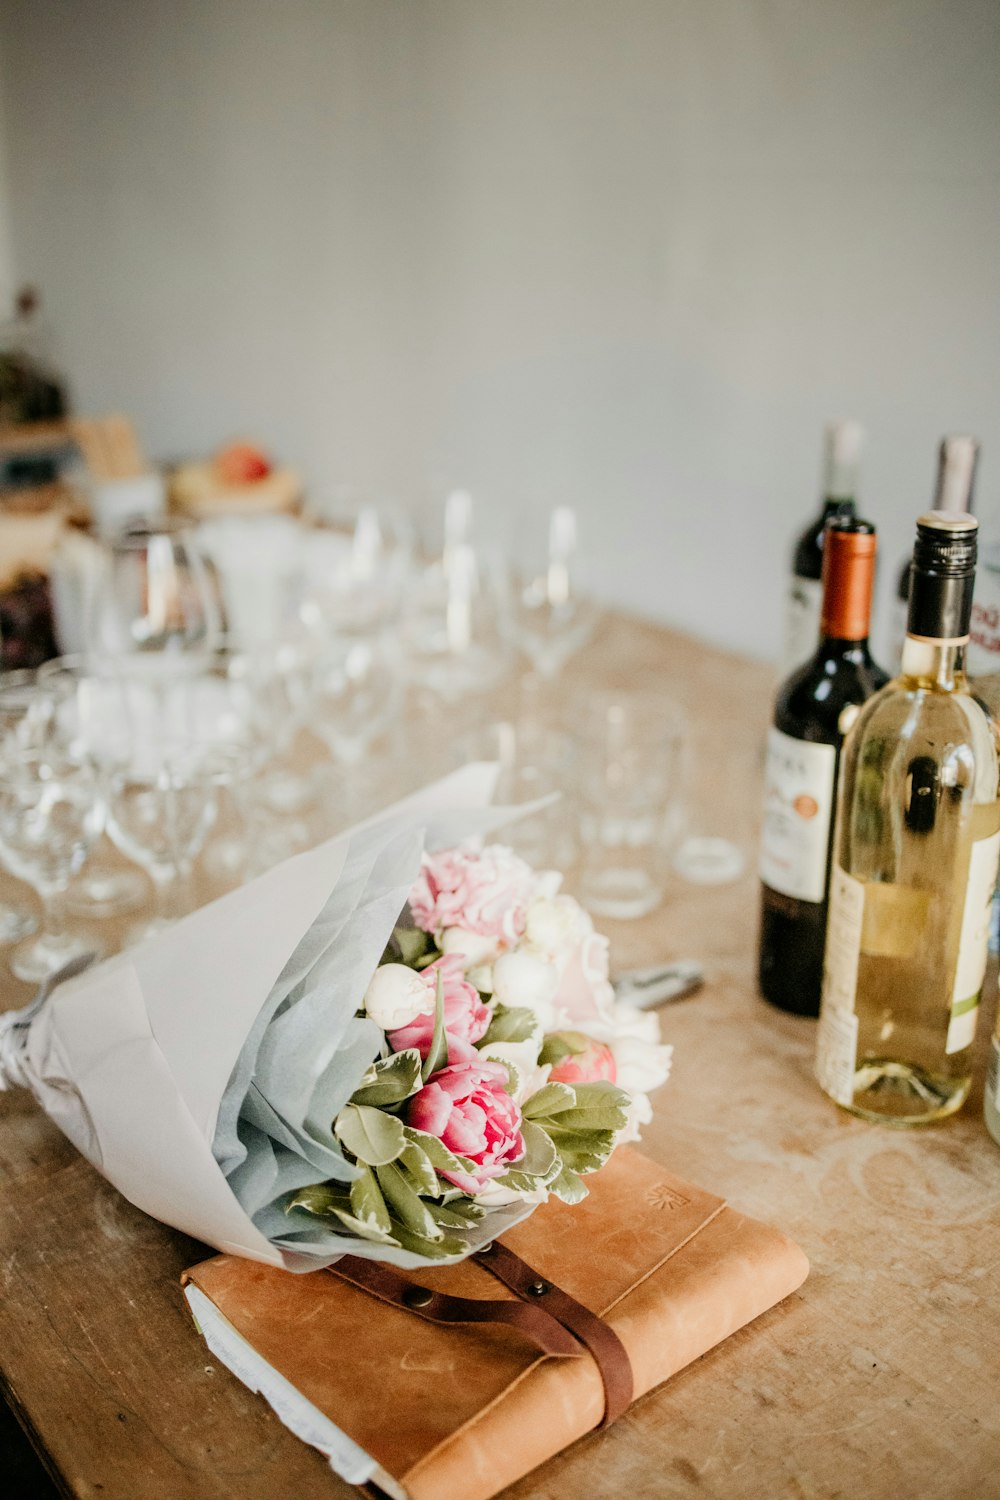 a table with wine bottles and glasses